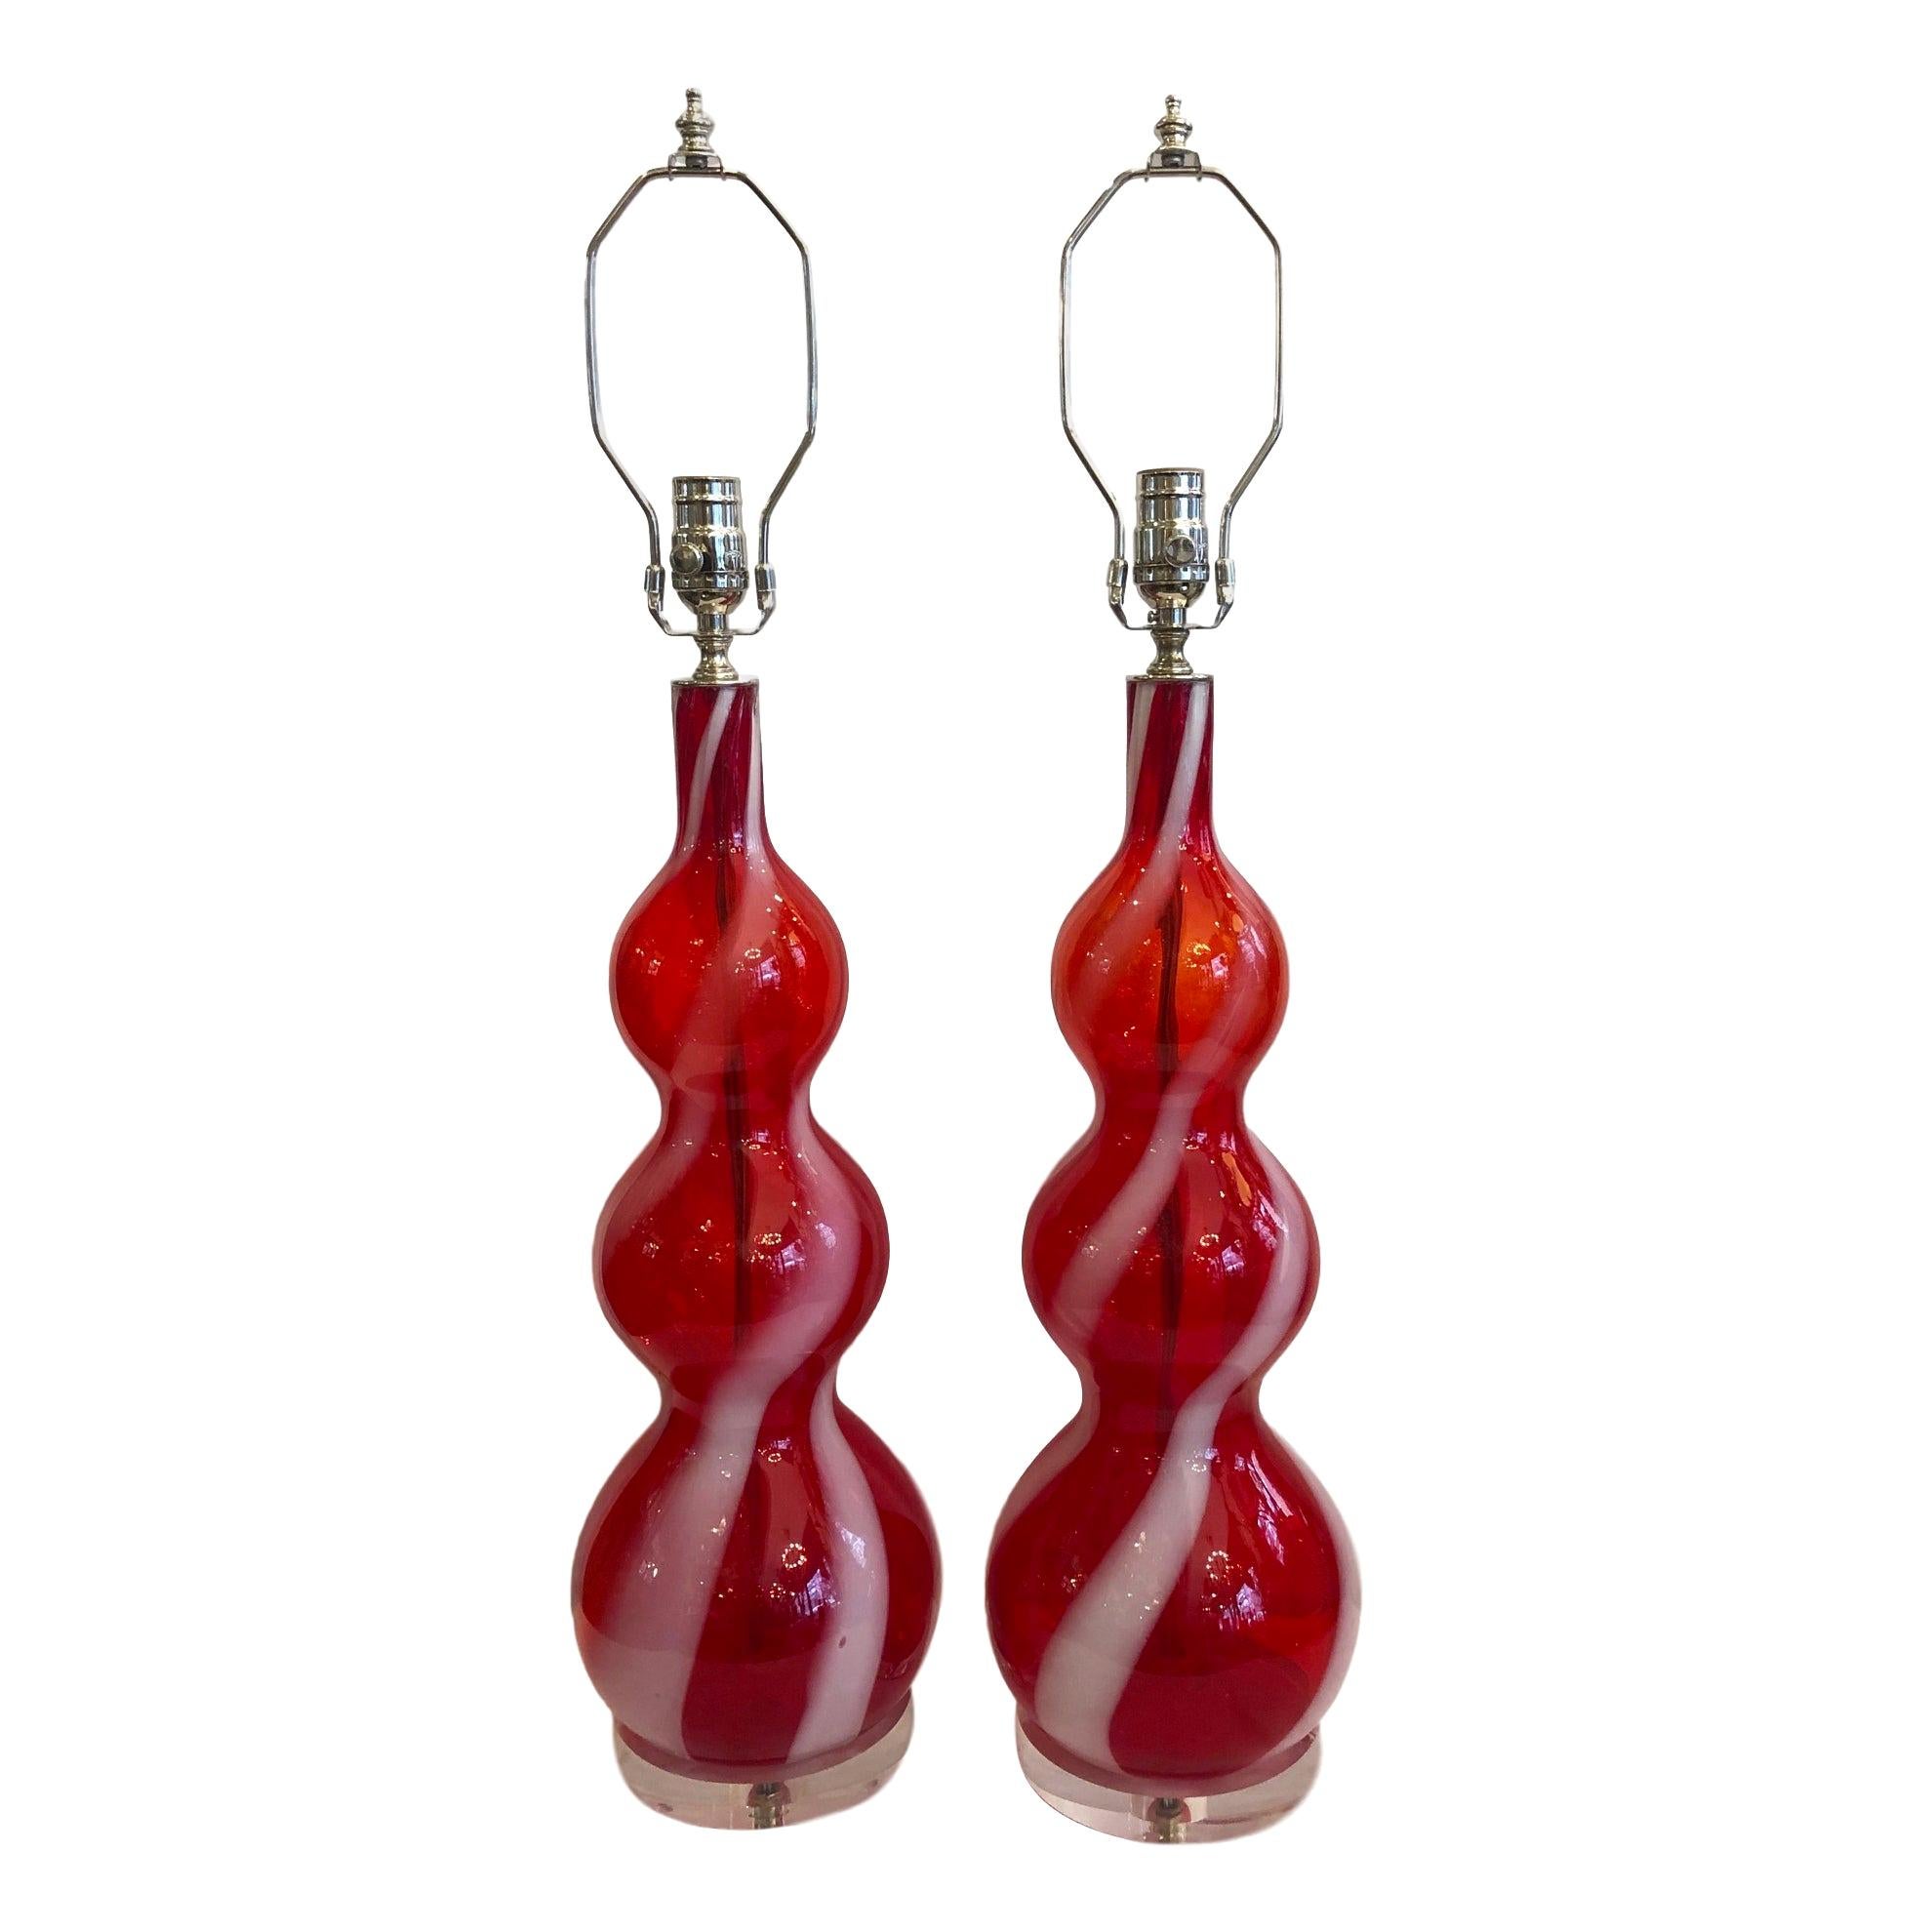 Pair of Red Glass Murano Lamps